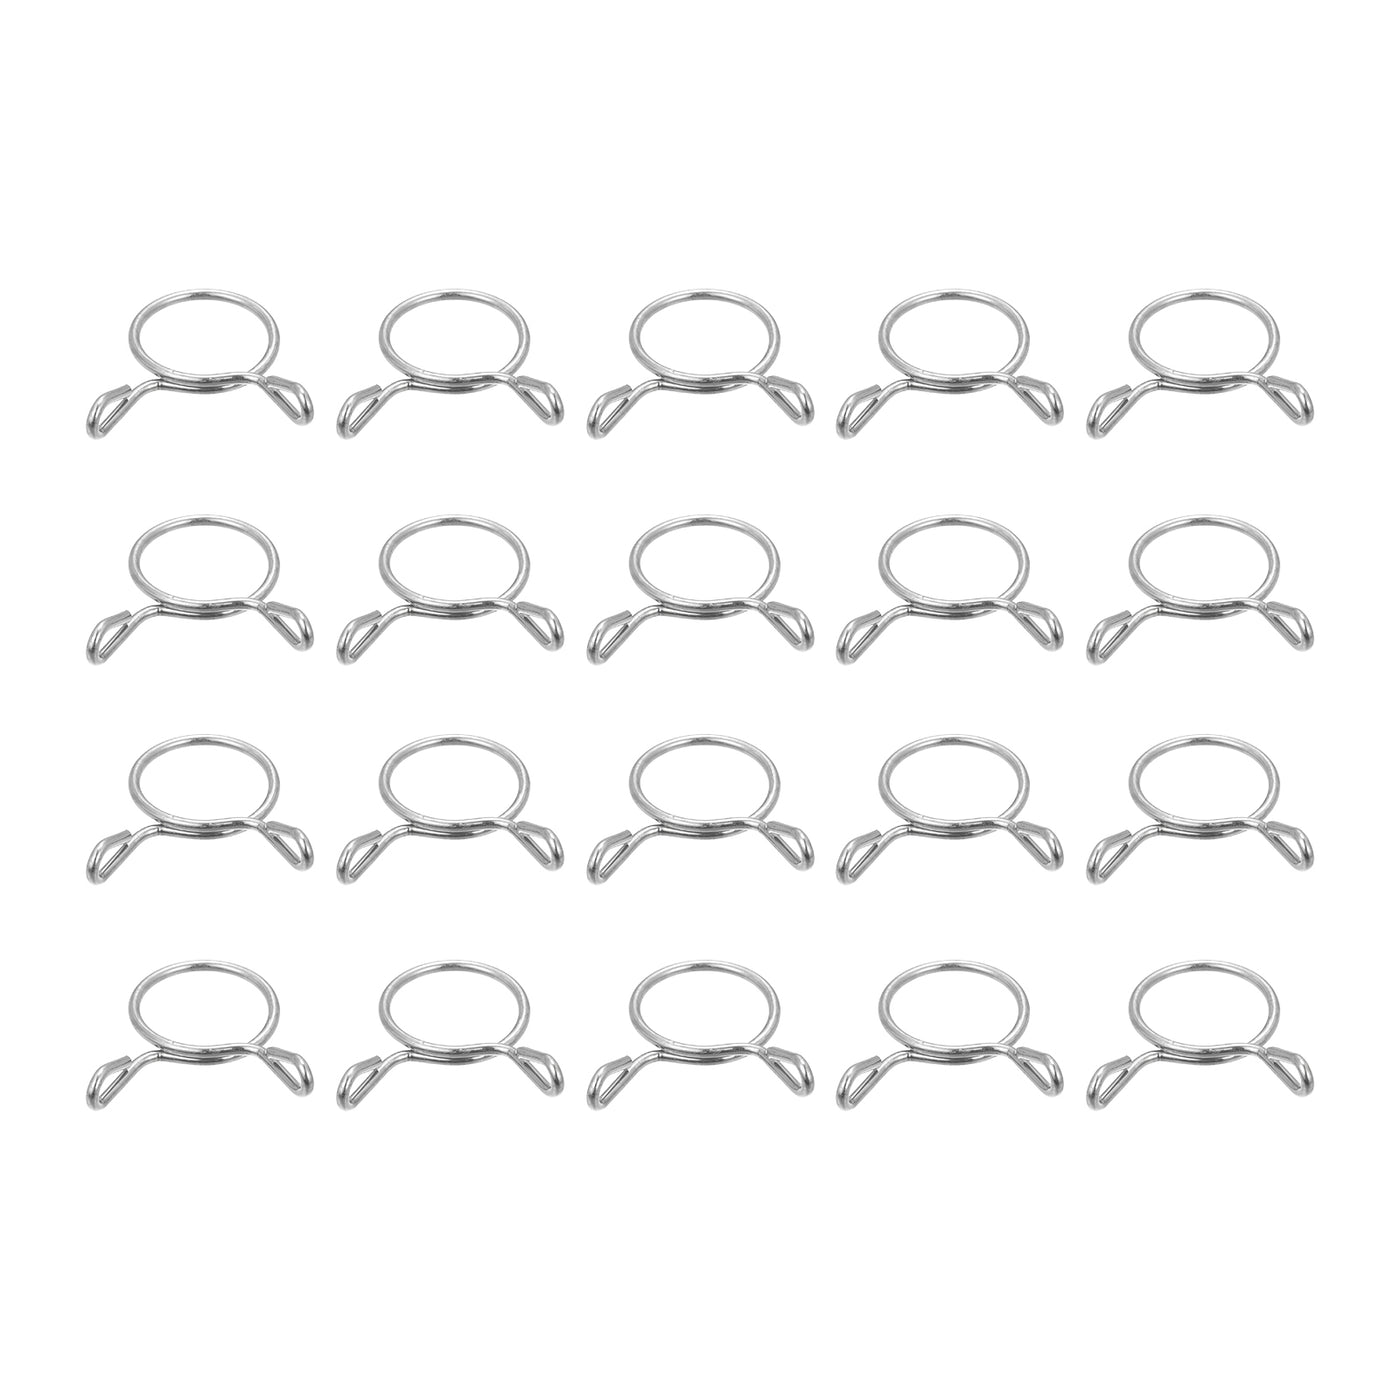 Uxcell Uxcell Fuel Line Hose Clips, 50pcs 18mm 304 Stainless Steel Tube Spring Clamps(Silver)